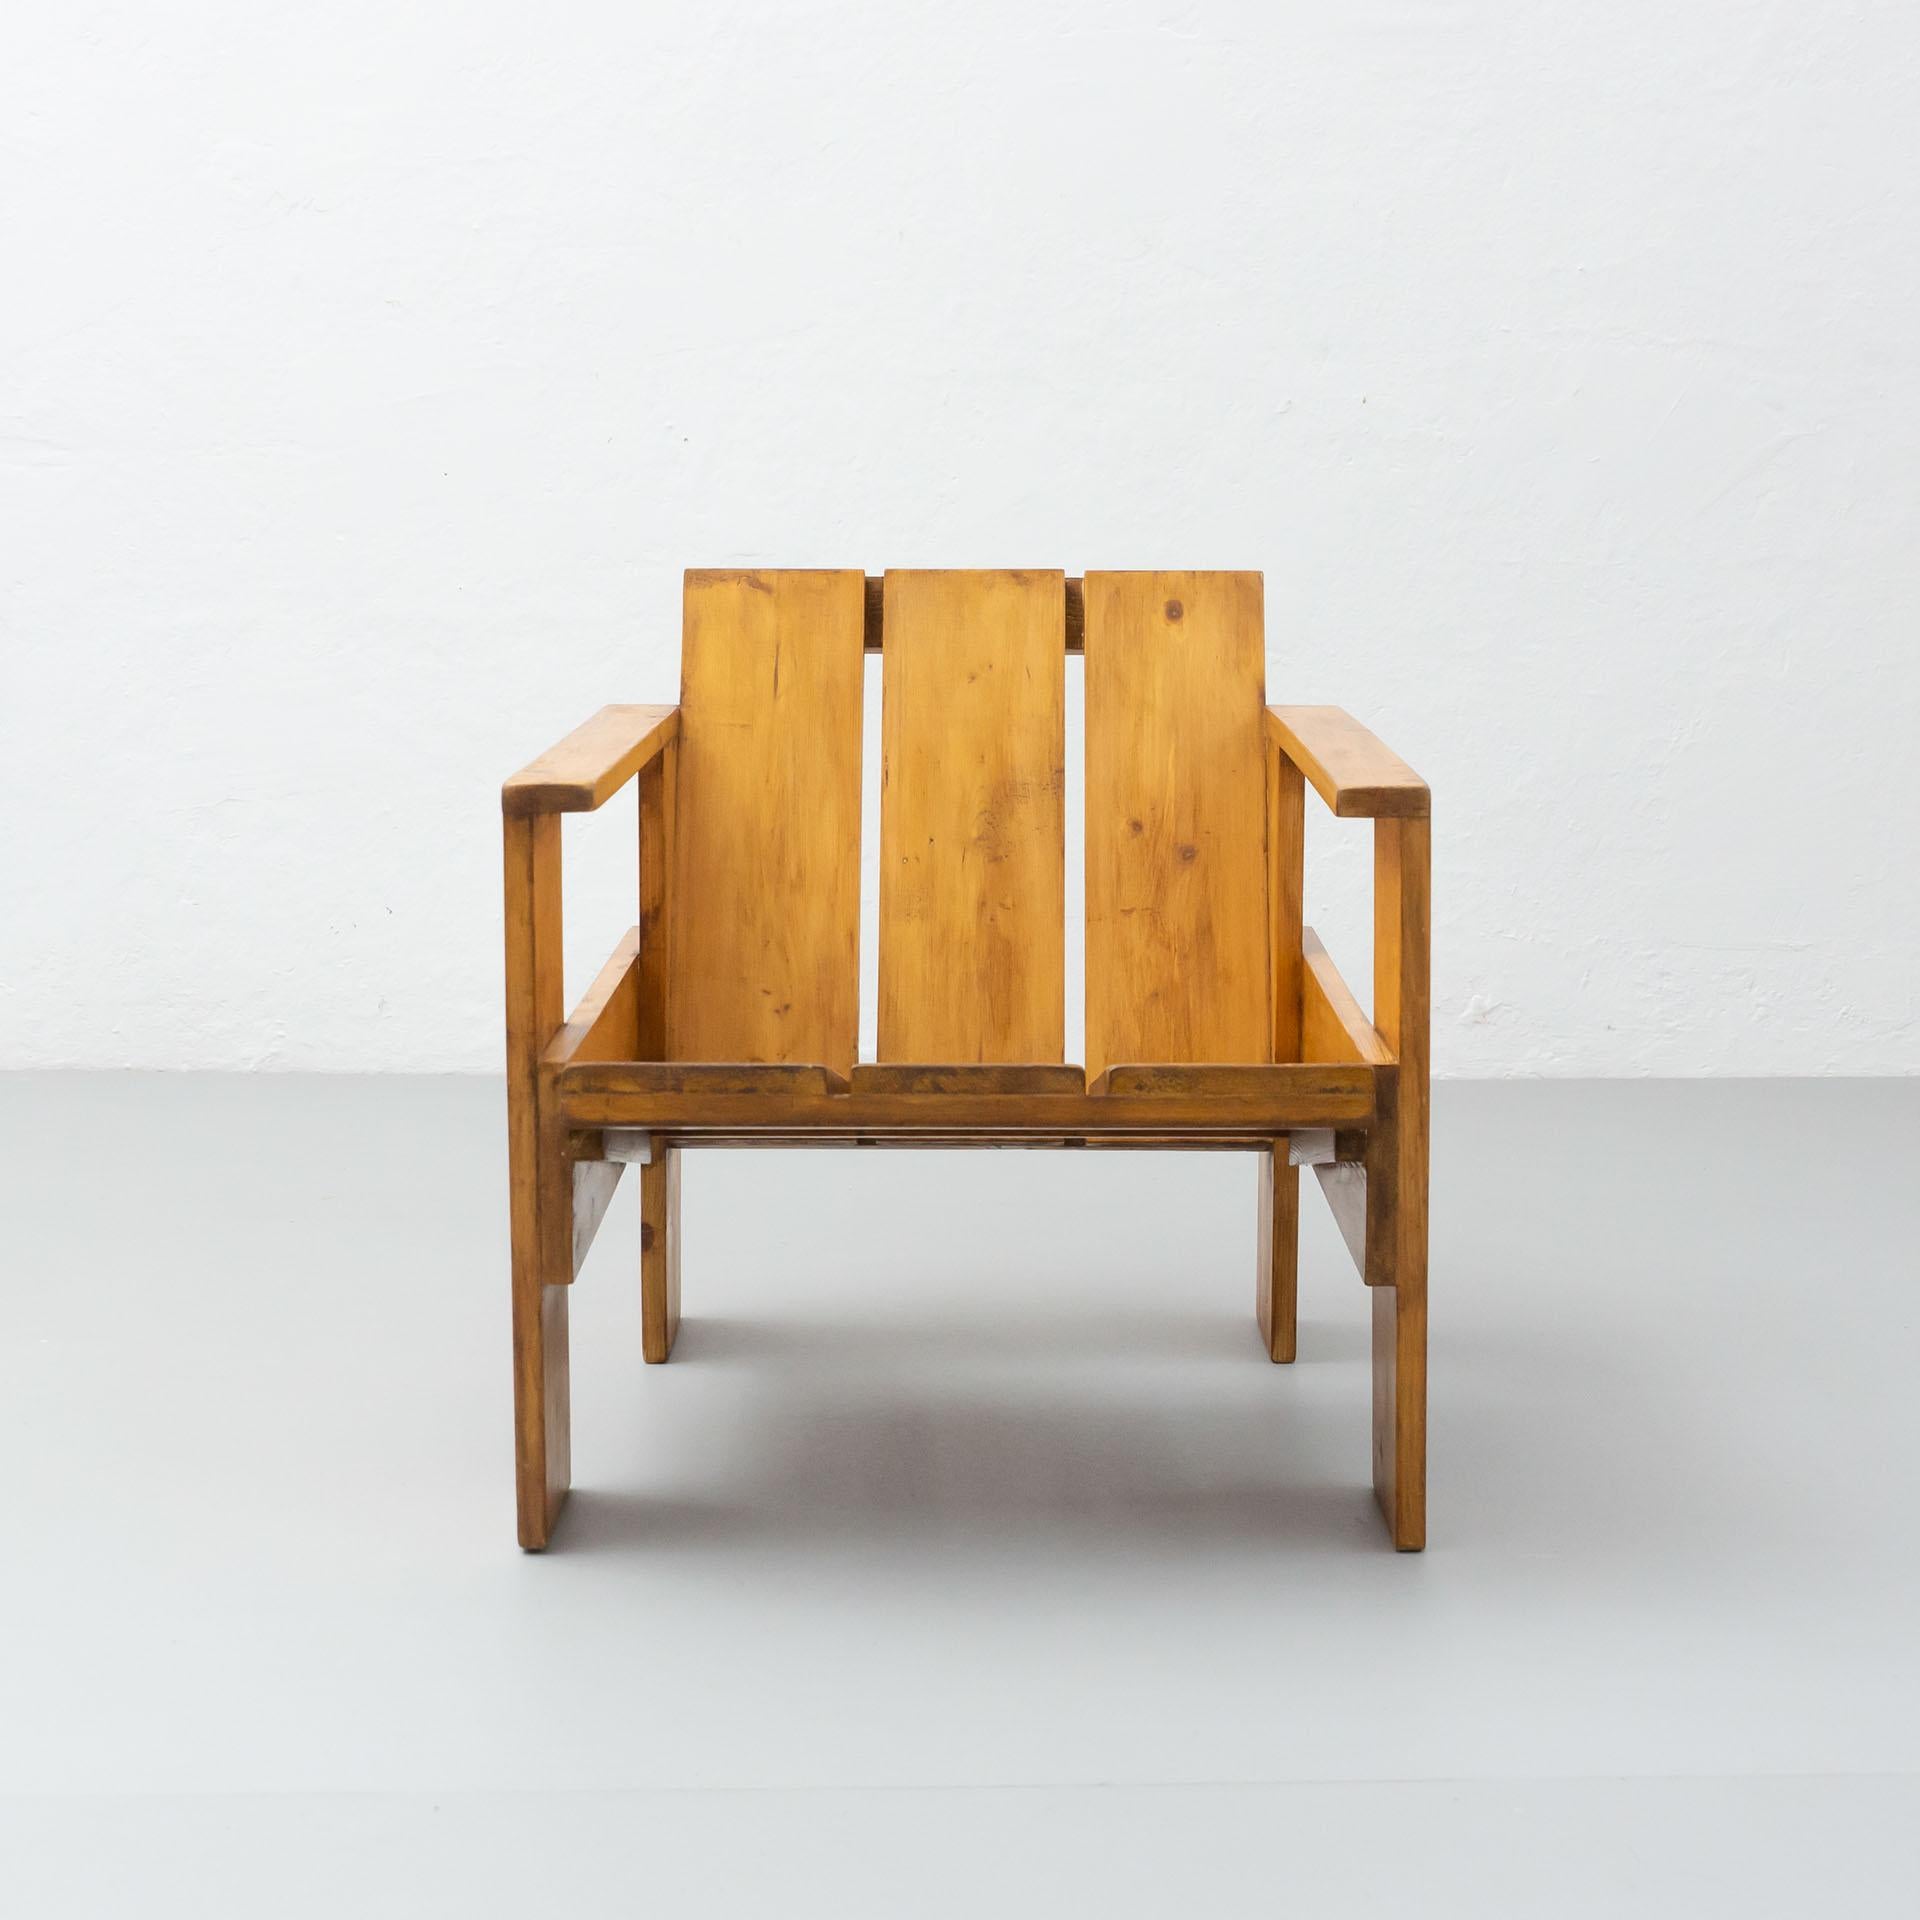 Crate chair designed by Gerrit Thomas Rietveld, executed circa 1950 by Metz and Co in Holland.

In good original condition, preserving a beautiful patina.

Materials
Wood

Dimensions:
D 72.5 cm x W 57.9 cm x H 59 cm

Gerrit Thomas Rietveld